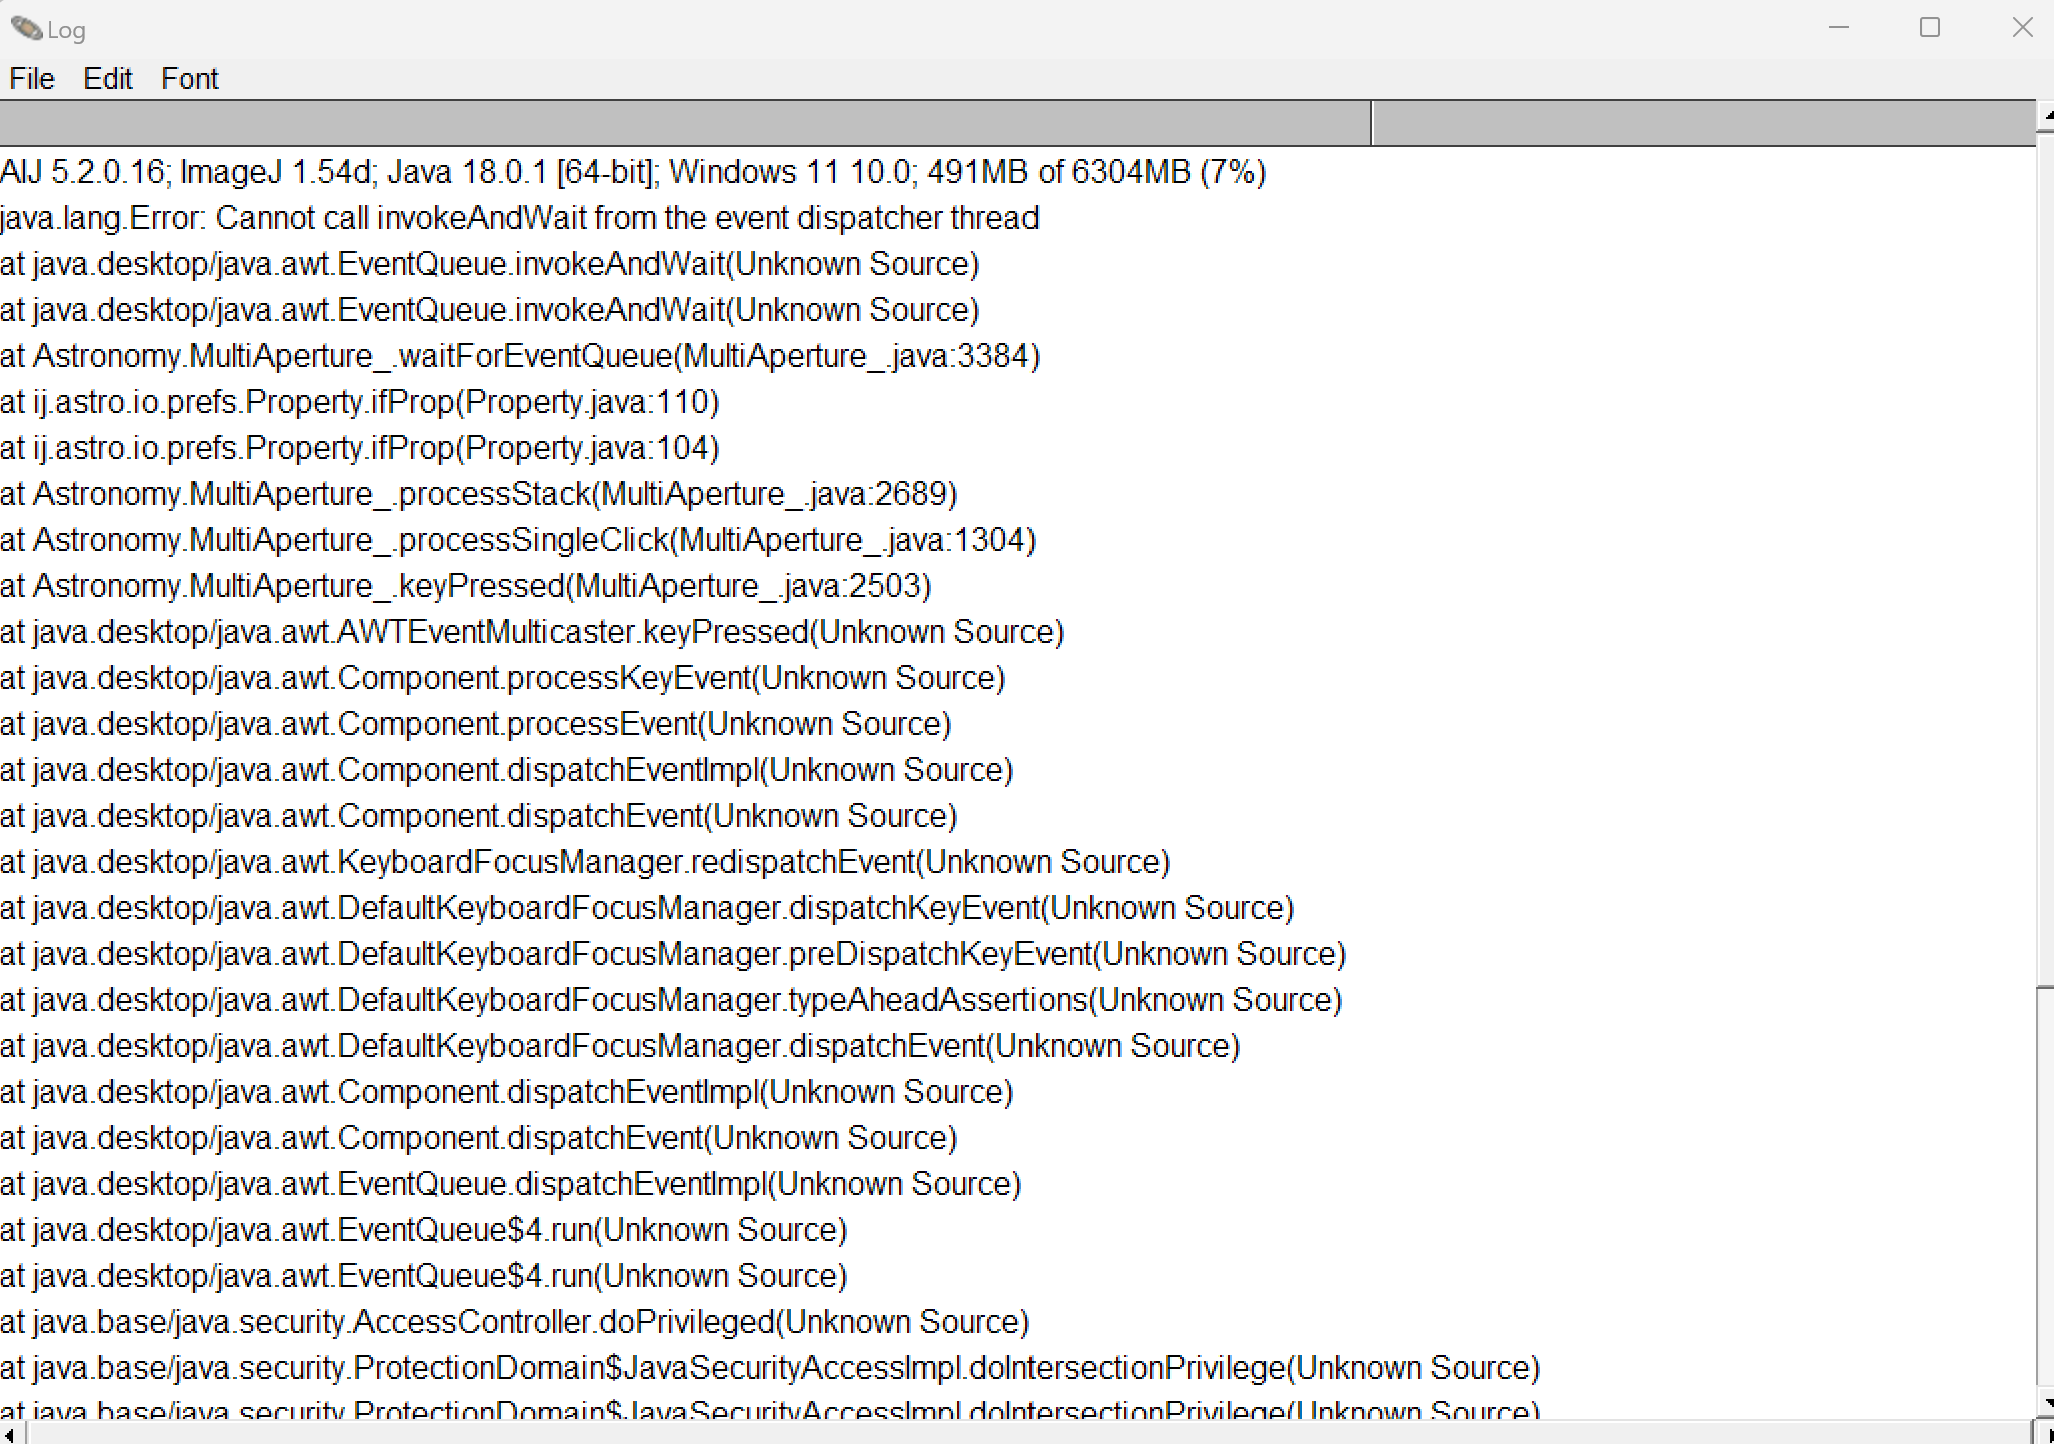 This screenshot shows the majority of the error, seemingly relating to Java?